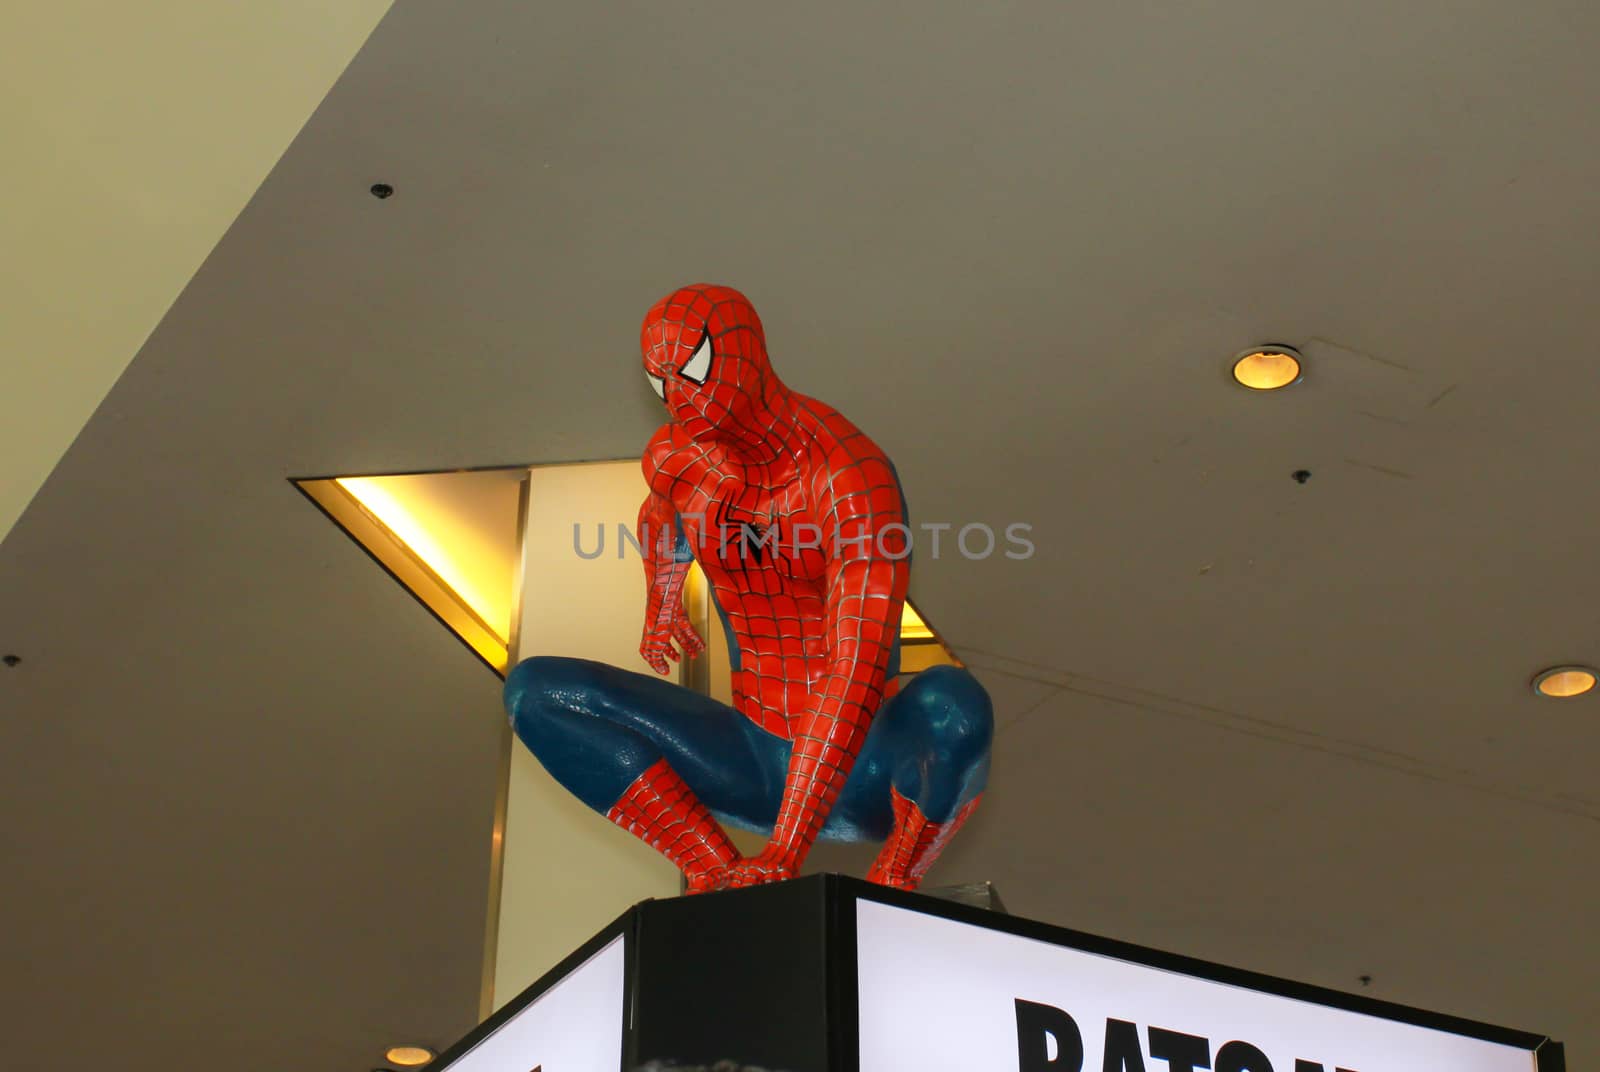 A model of the character Spiderman from the movies and comics 2 by redthirteen